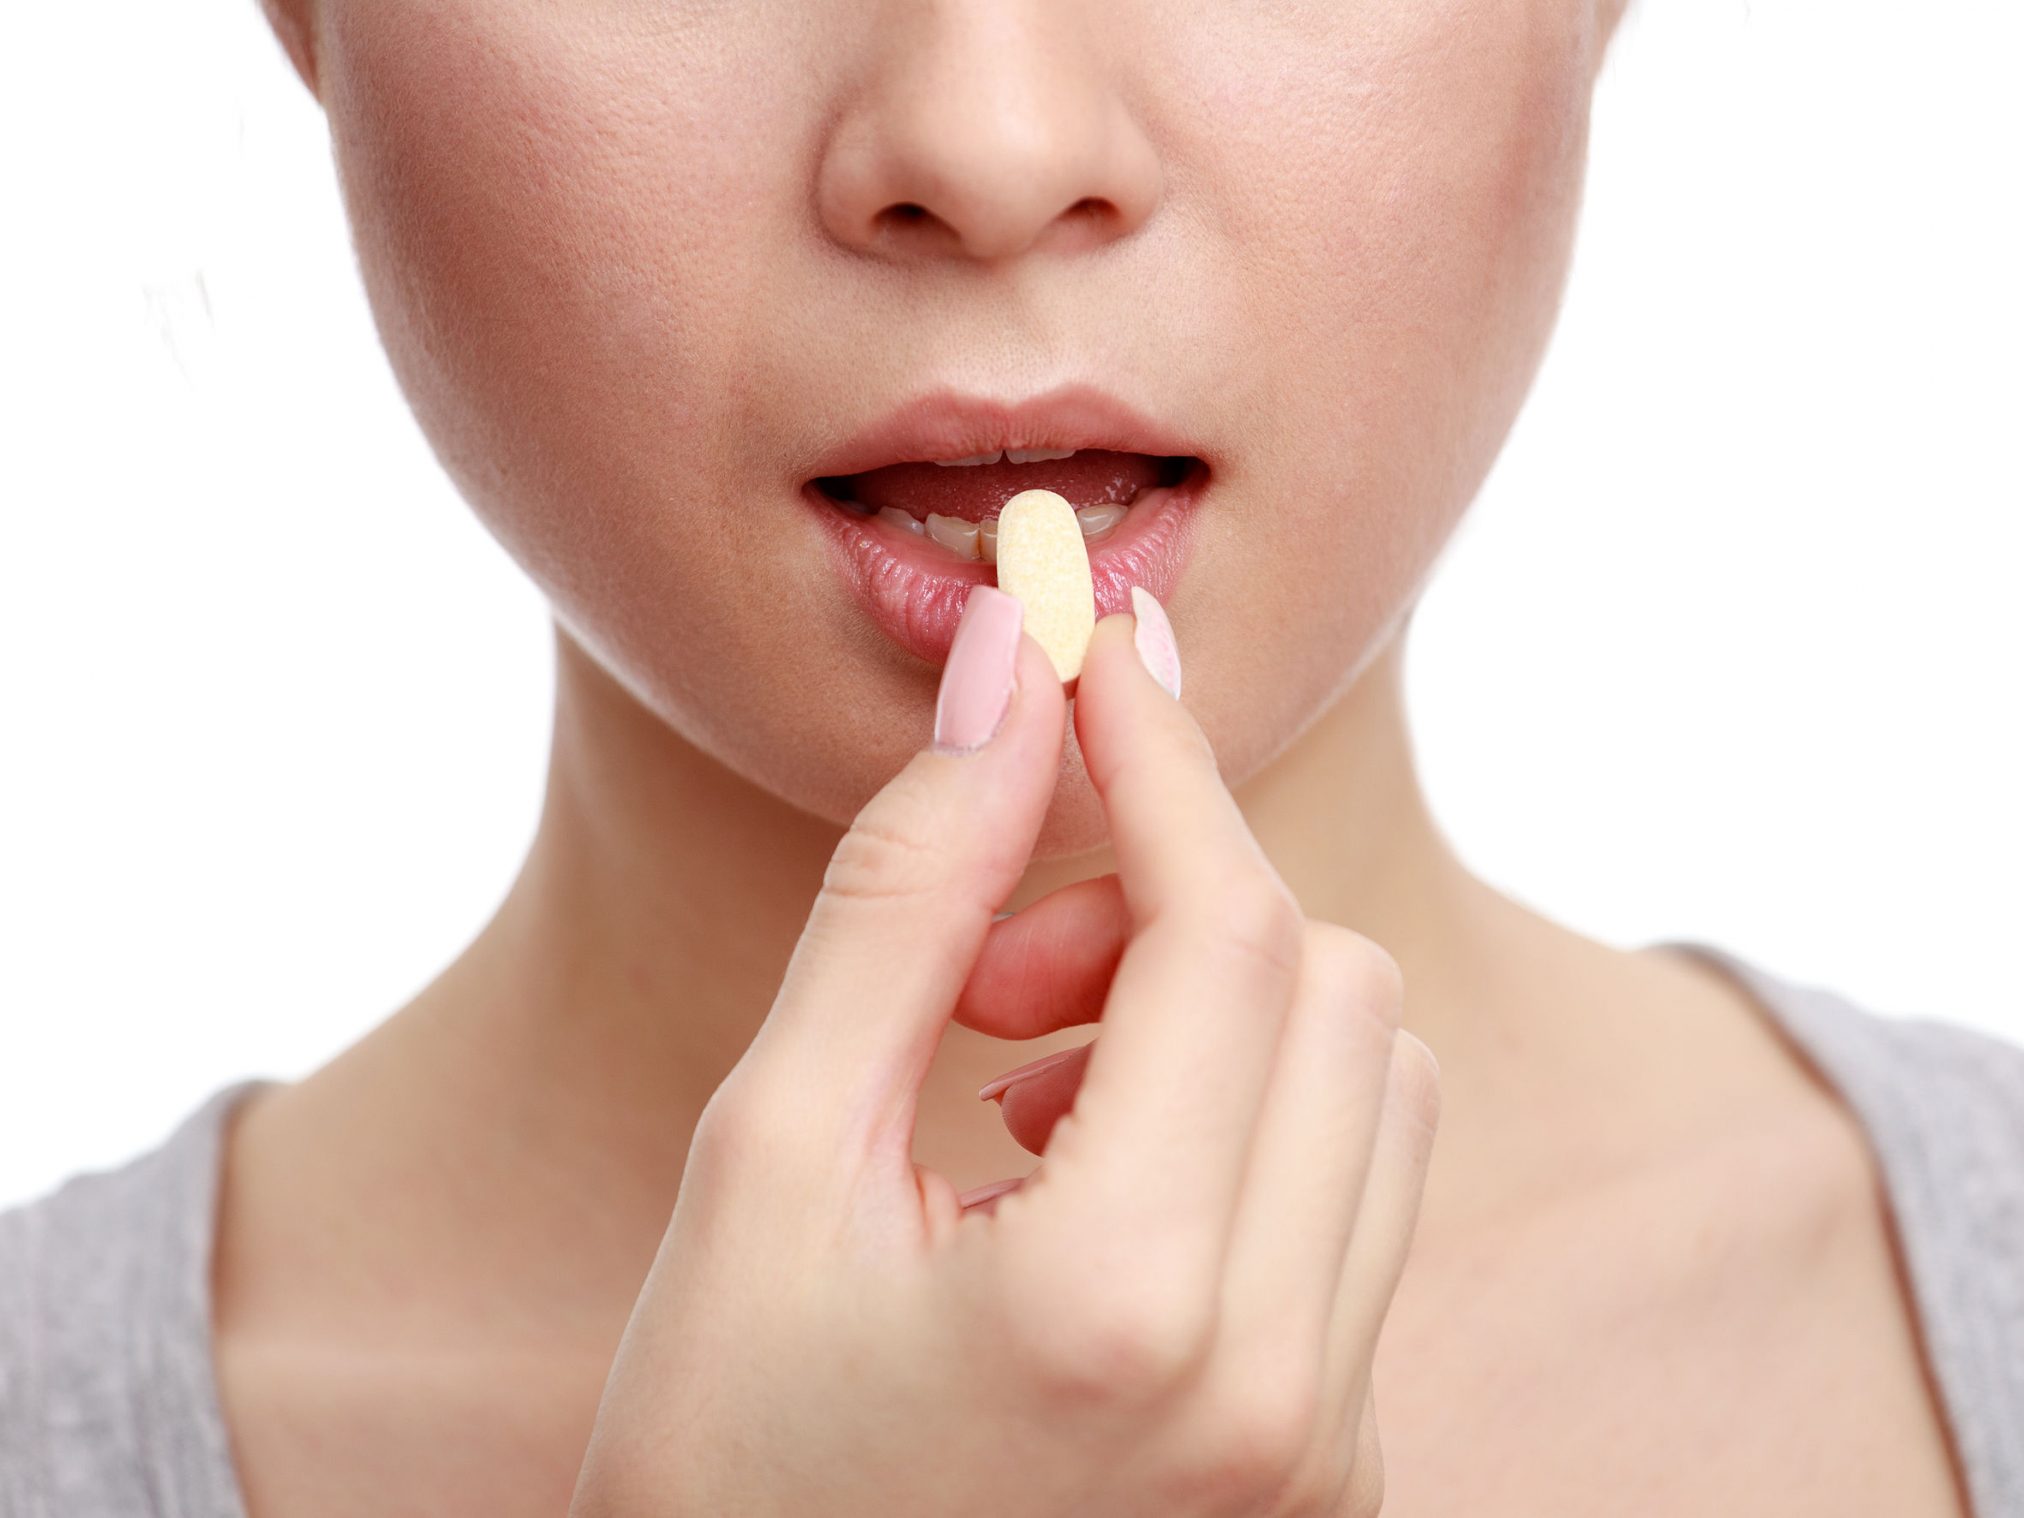 51906249 - woman taking a tablet. close up hand with a pill and the mouth, isolated on white background